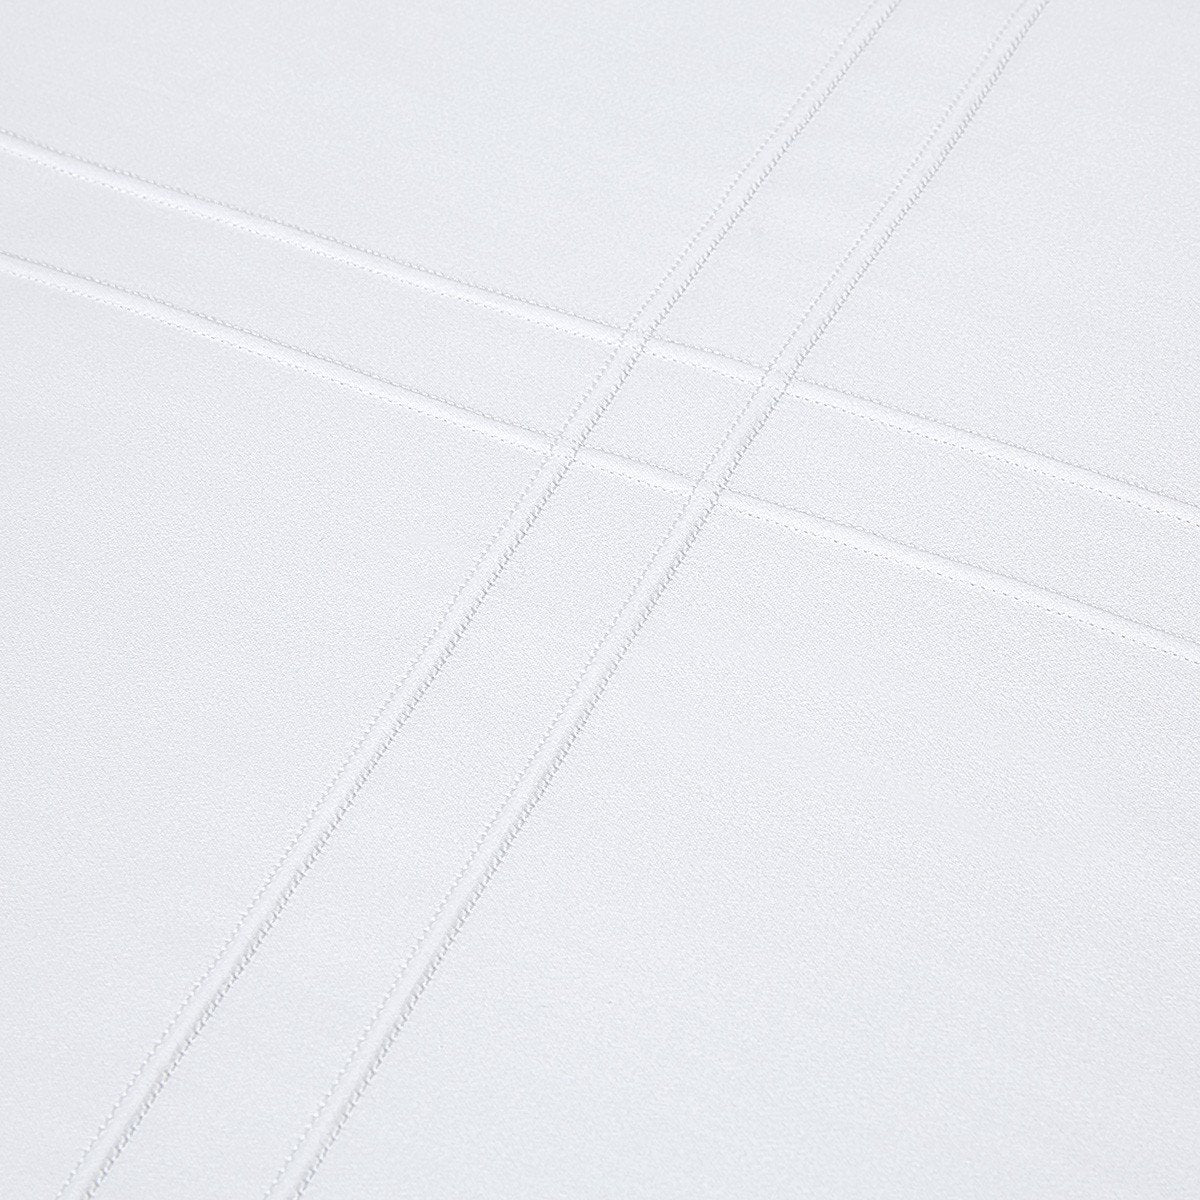 Adagio Blanc Bedding Collection by Yves Delorme | Fig Linens - white, cotton, luxury, bed linen